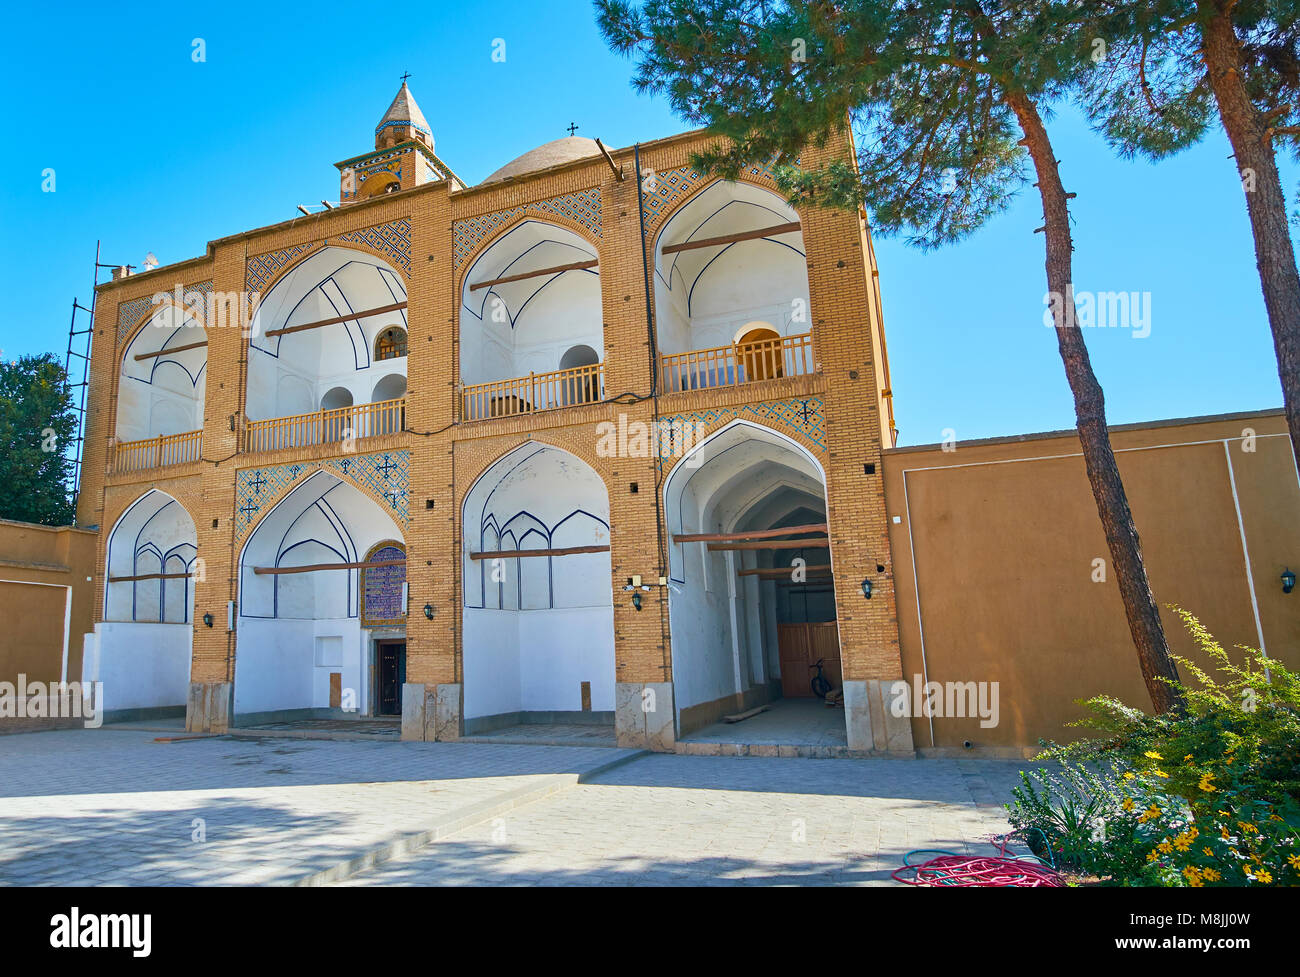 The facade of medieval Bethlehem Church, located in New Julfa Armenian neighborhood, building is decorated with white niches and tiled patterns, Isfah Stock Photo